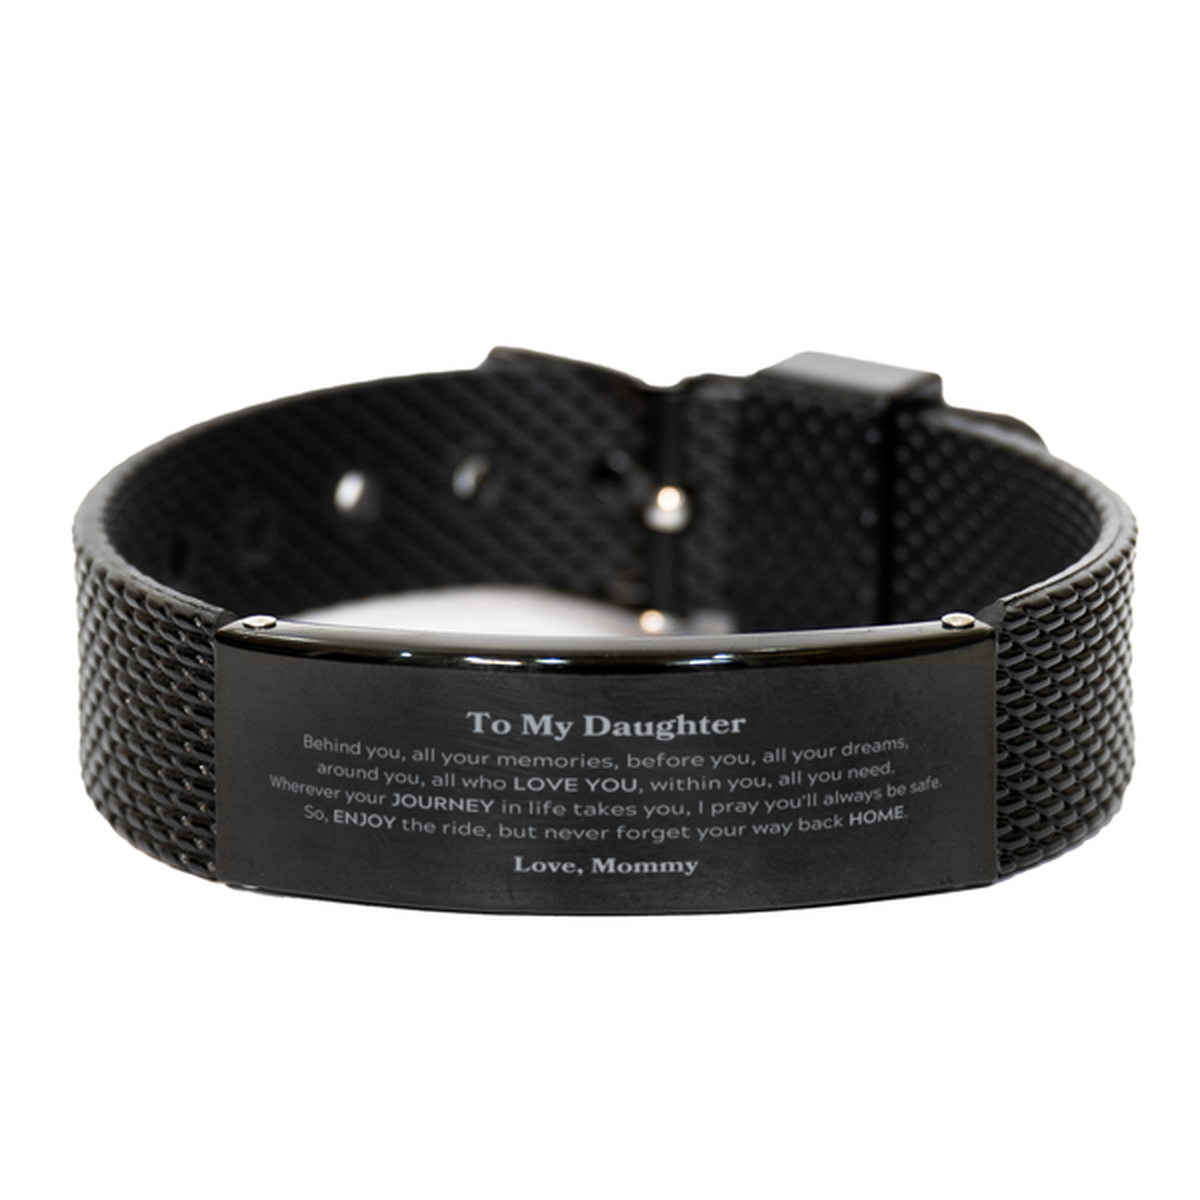 To My Daughter Graduation Gifts from Mommy, Daughter Black Shark Mesh Bracelet Christmas Birthday Gifts for Daughter Behind you, all your memories, before you, all your dreams. Love, Mommy